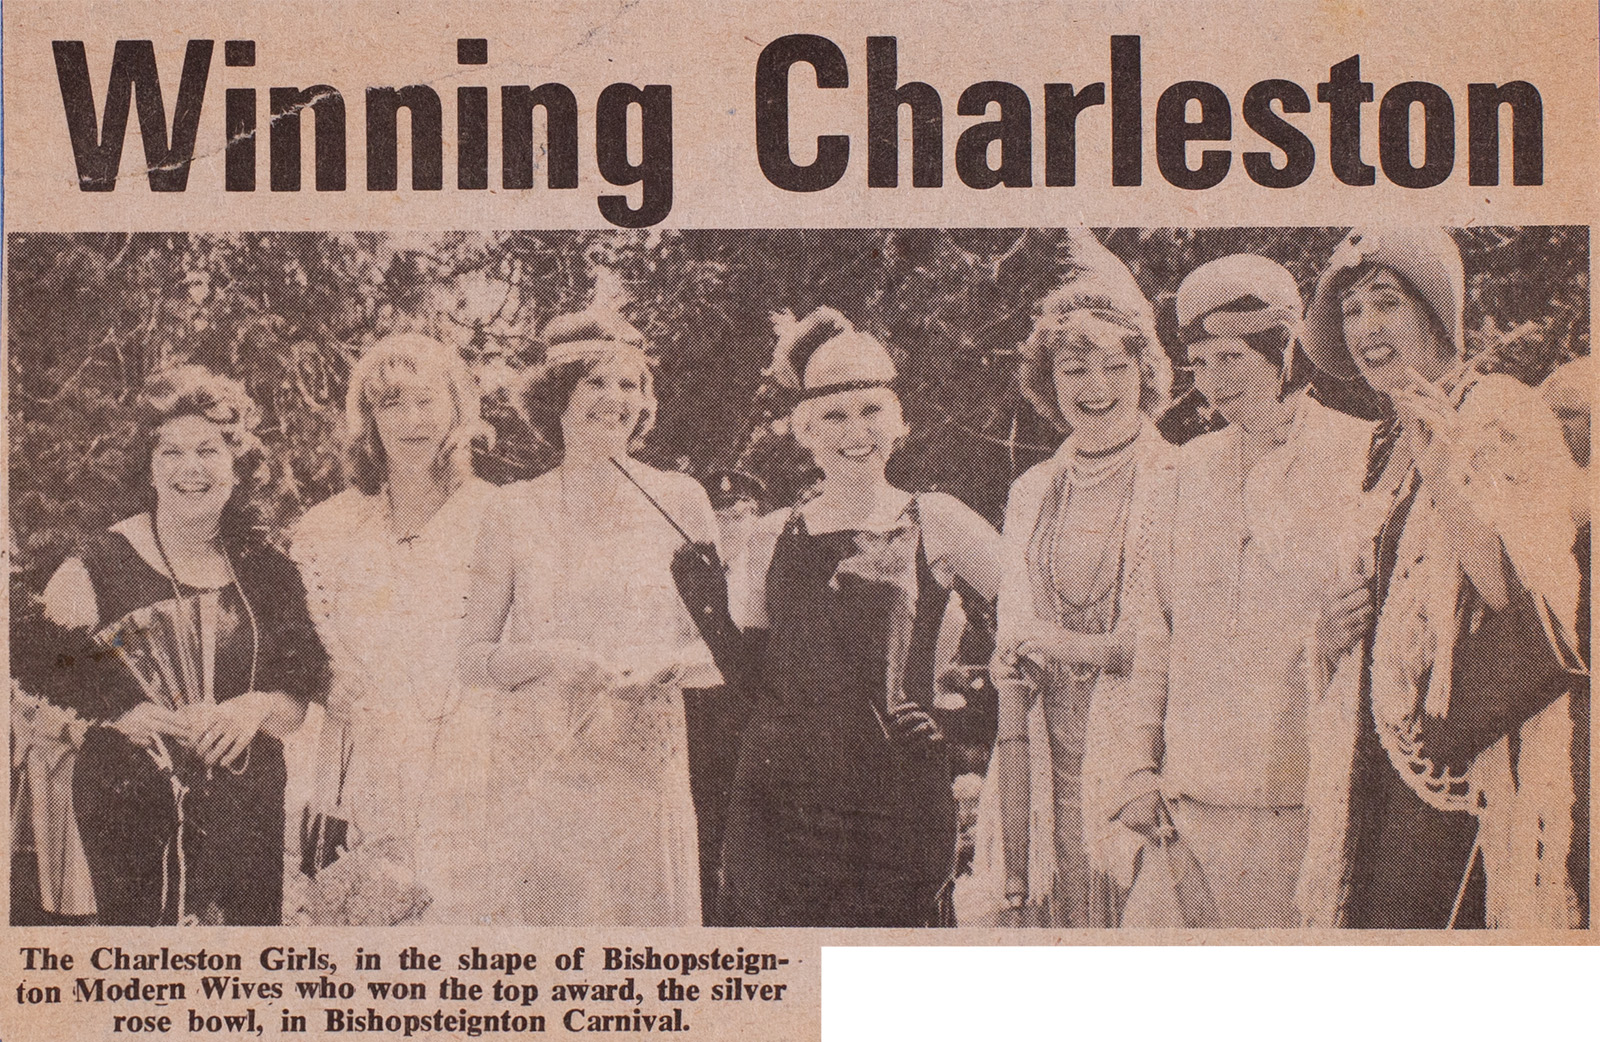 Modern wives winning carnival entry 1978 Advertiser newspaper cutting part of 27038